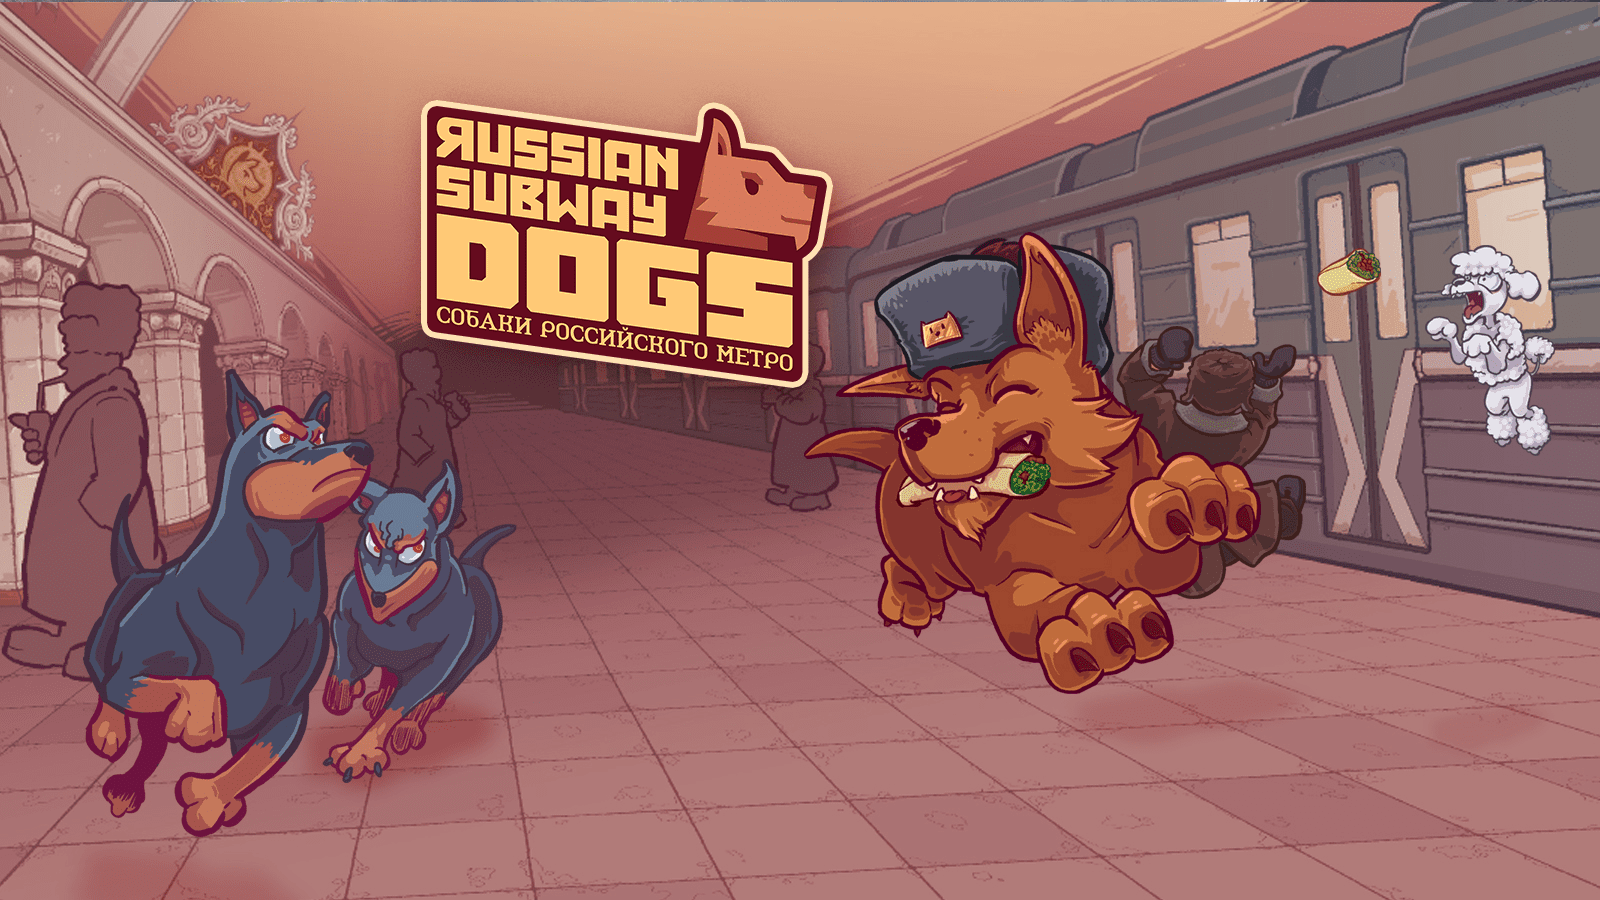 Russian Subway Dogs – Review